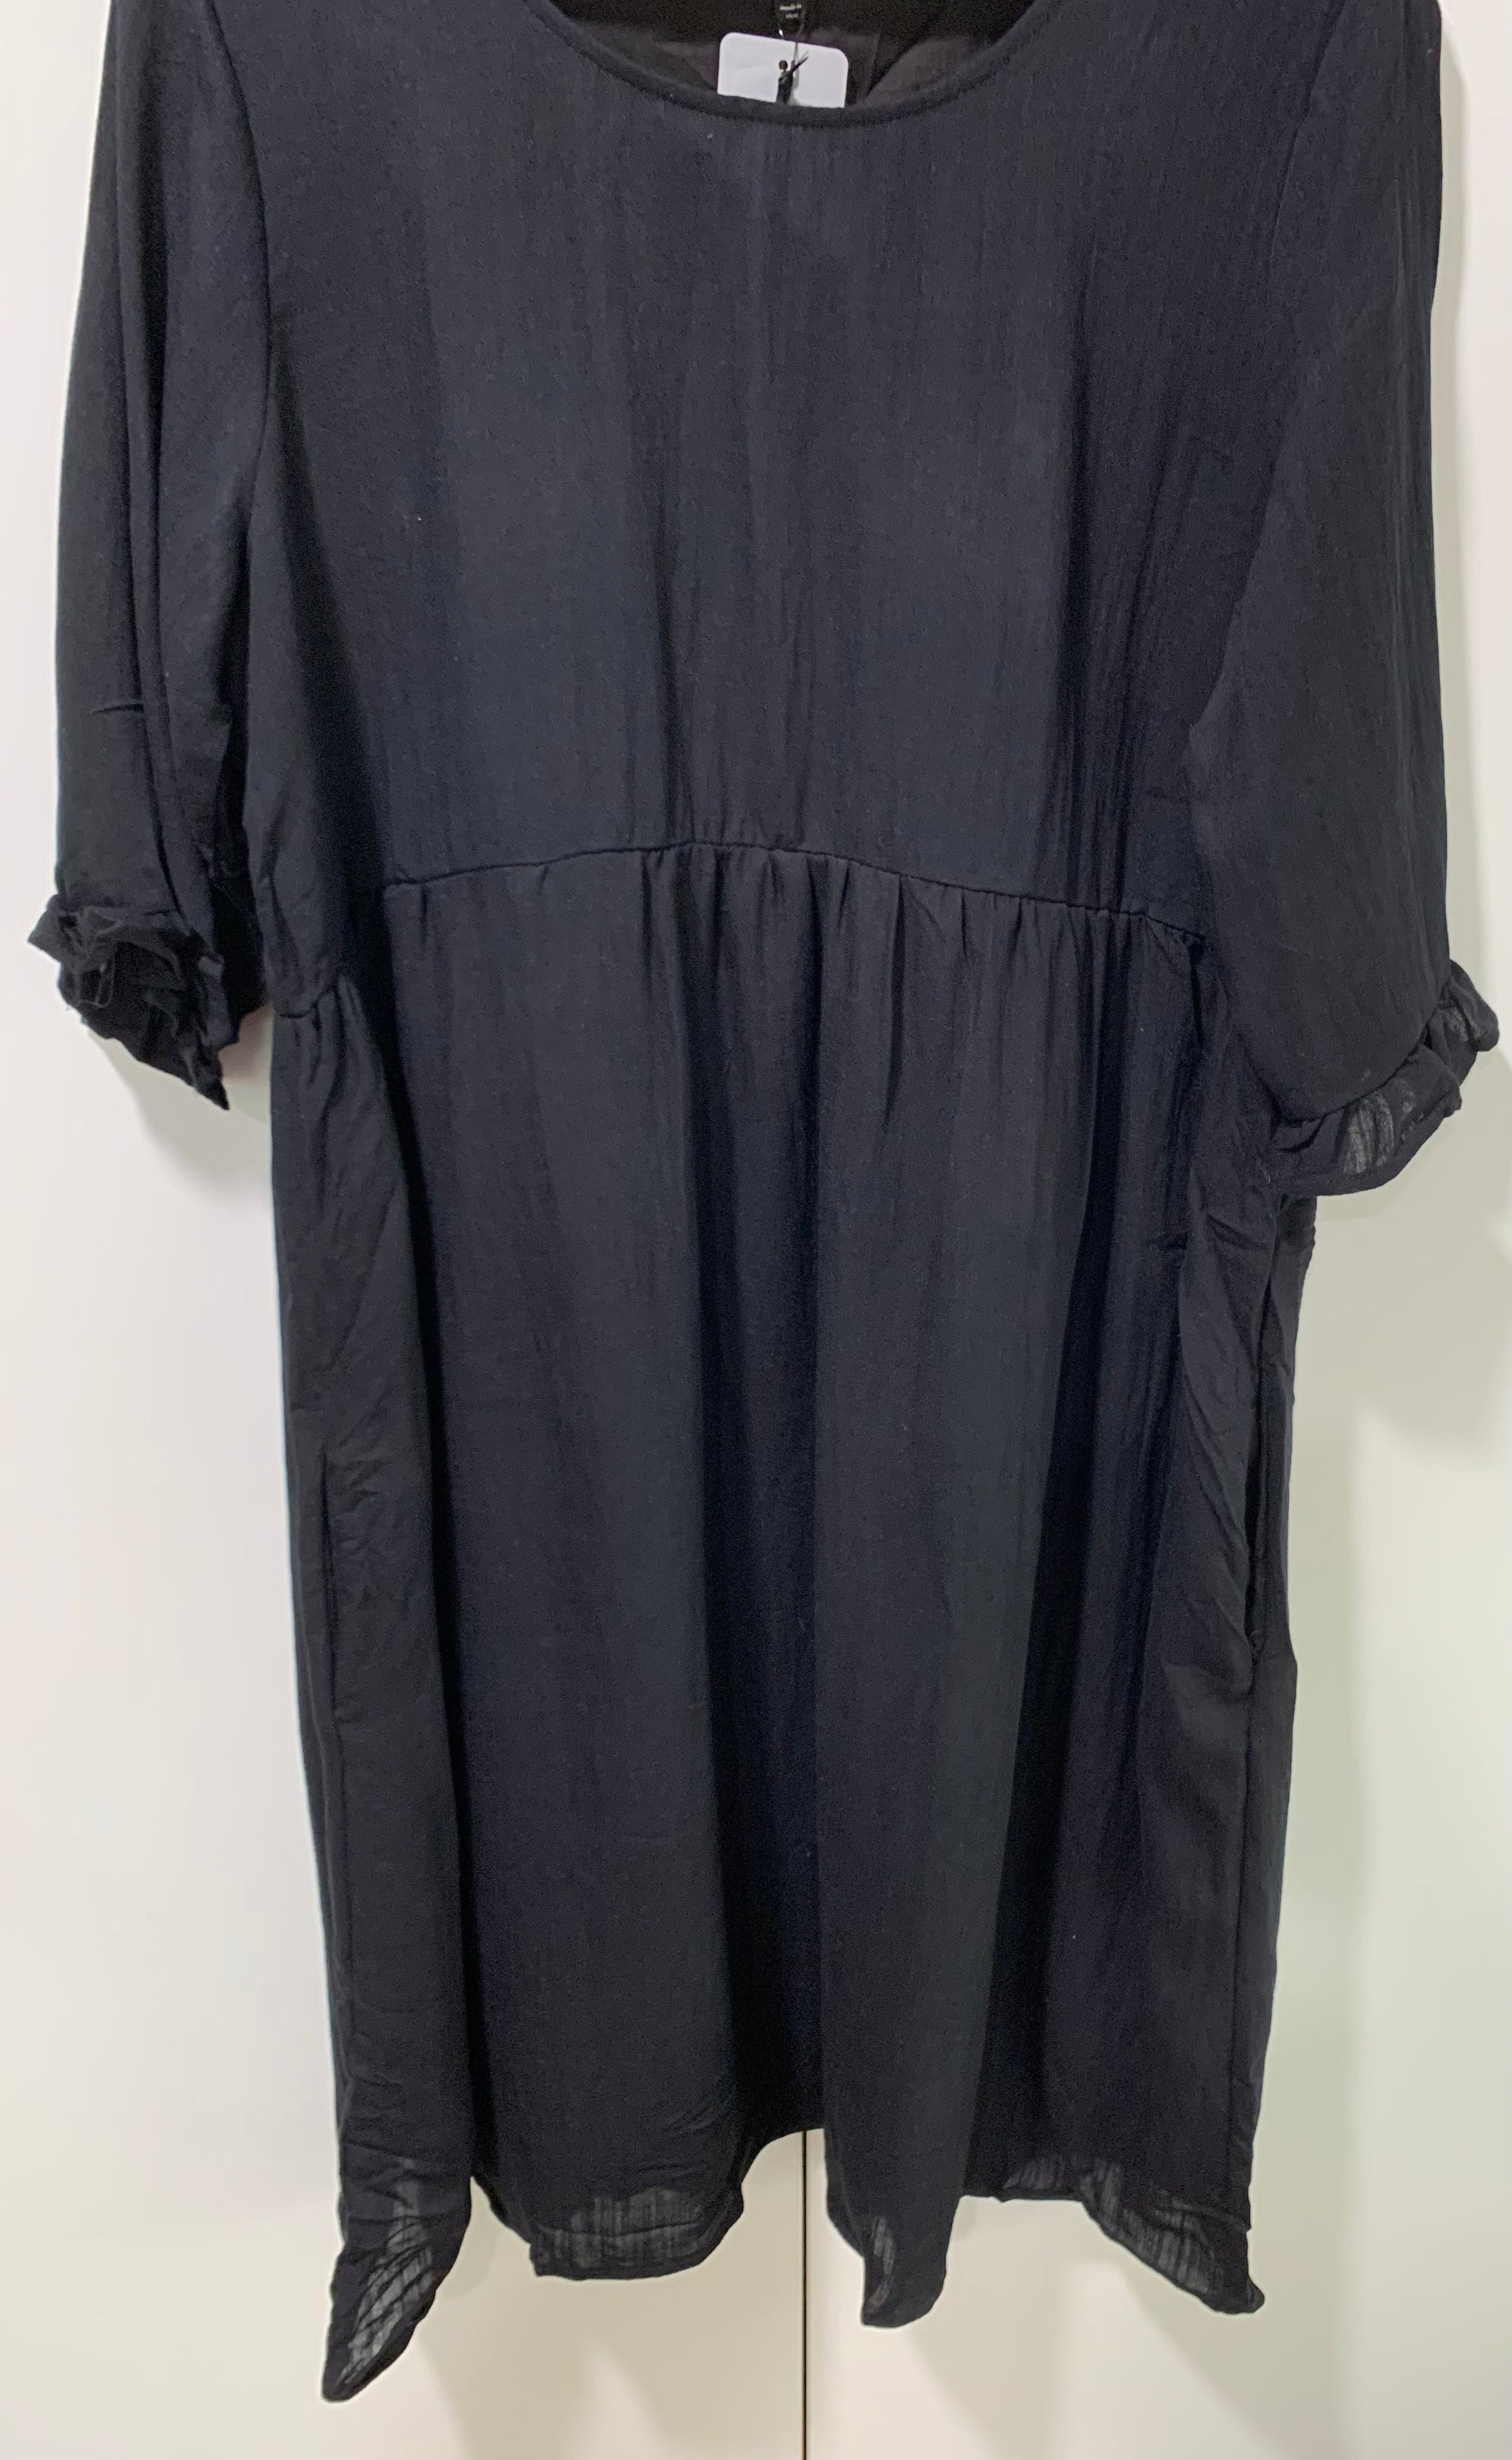 Tunic Dress in Black Linen/Rayon w Frill Sleeves in Black - Willow Tree